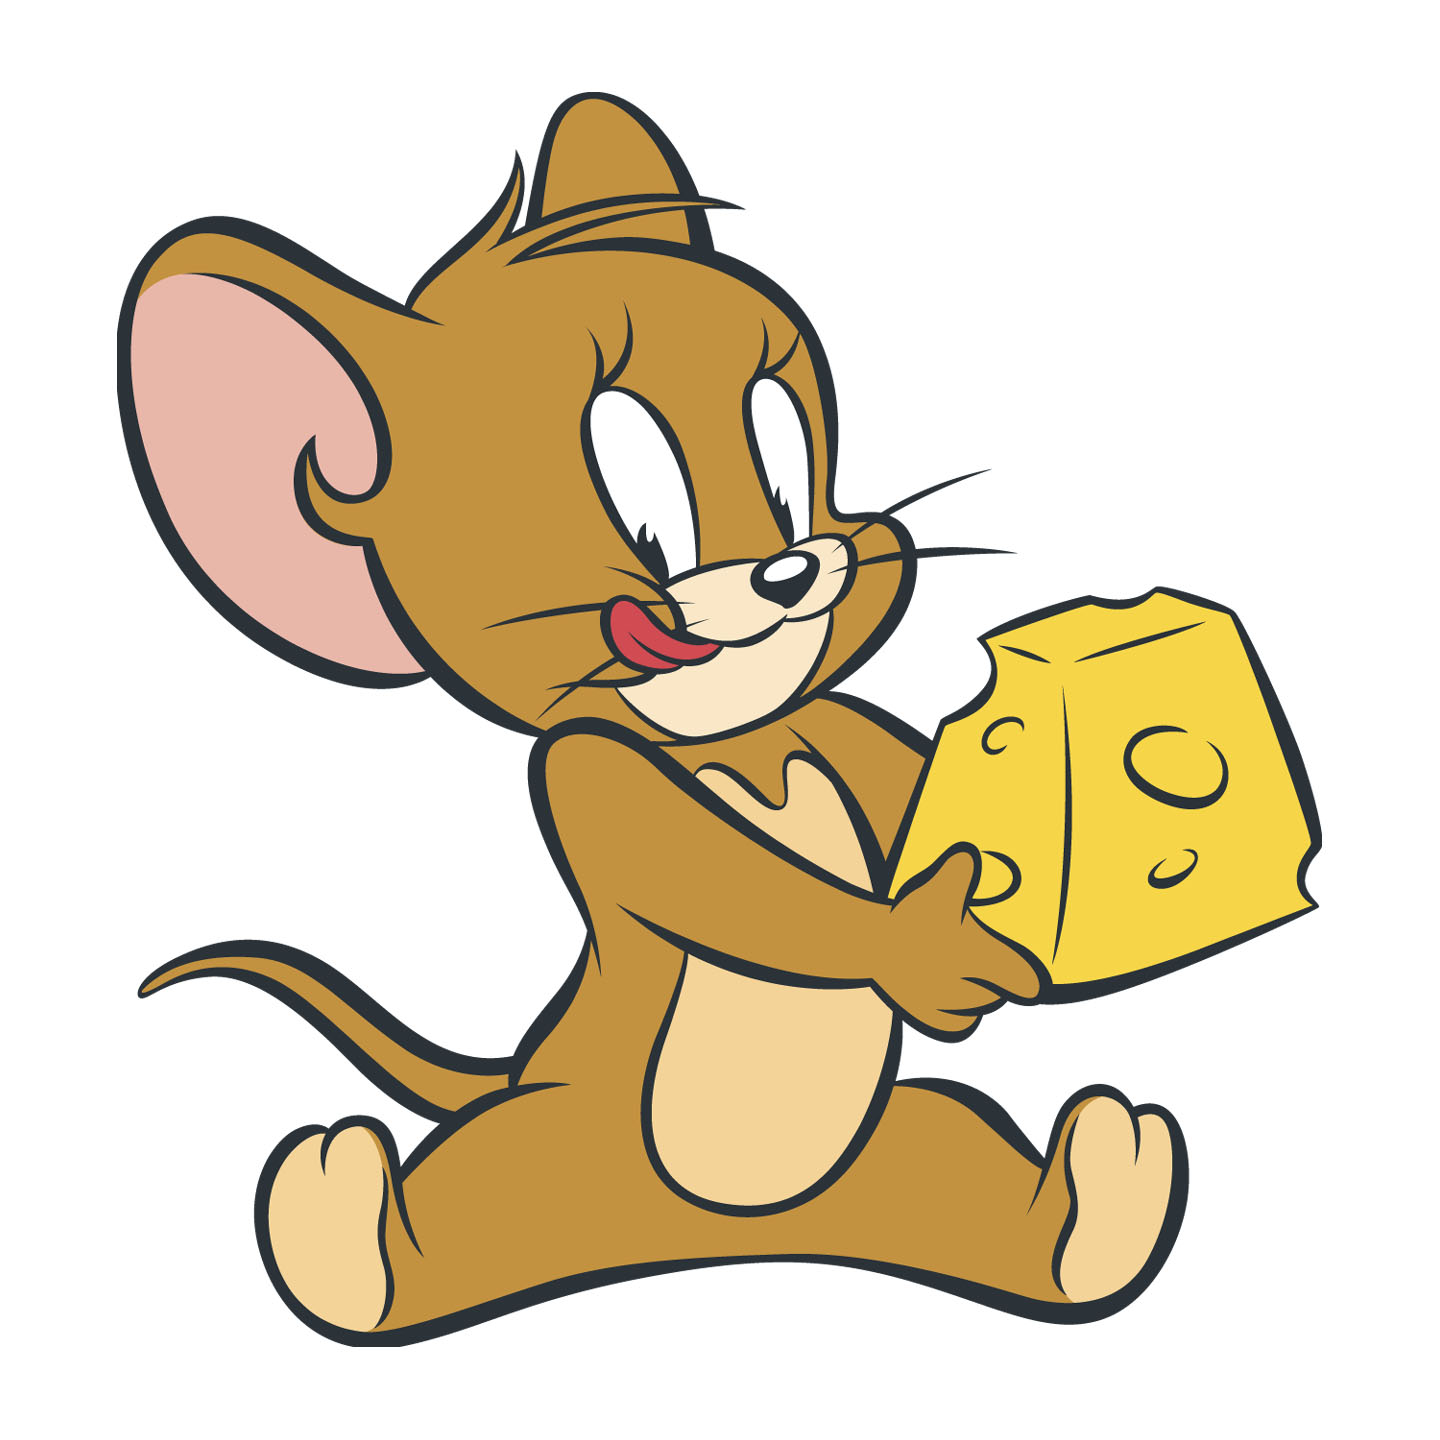 Jerry The Mouse | Cartoon characters Wiki | Fandom